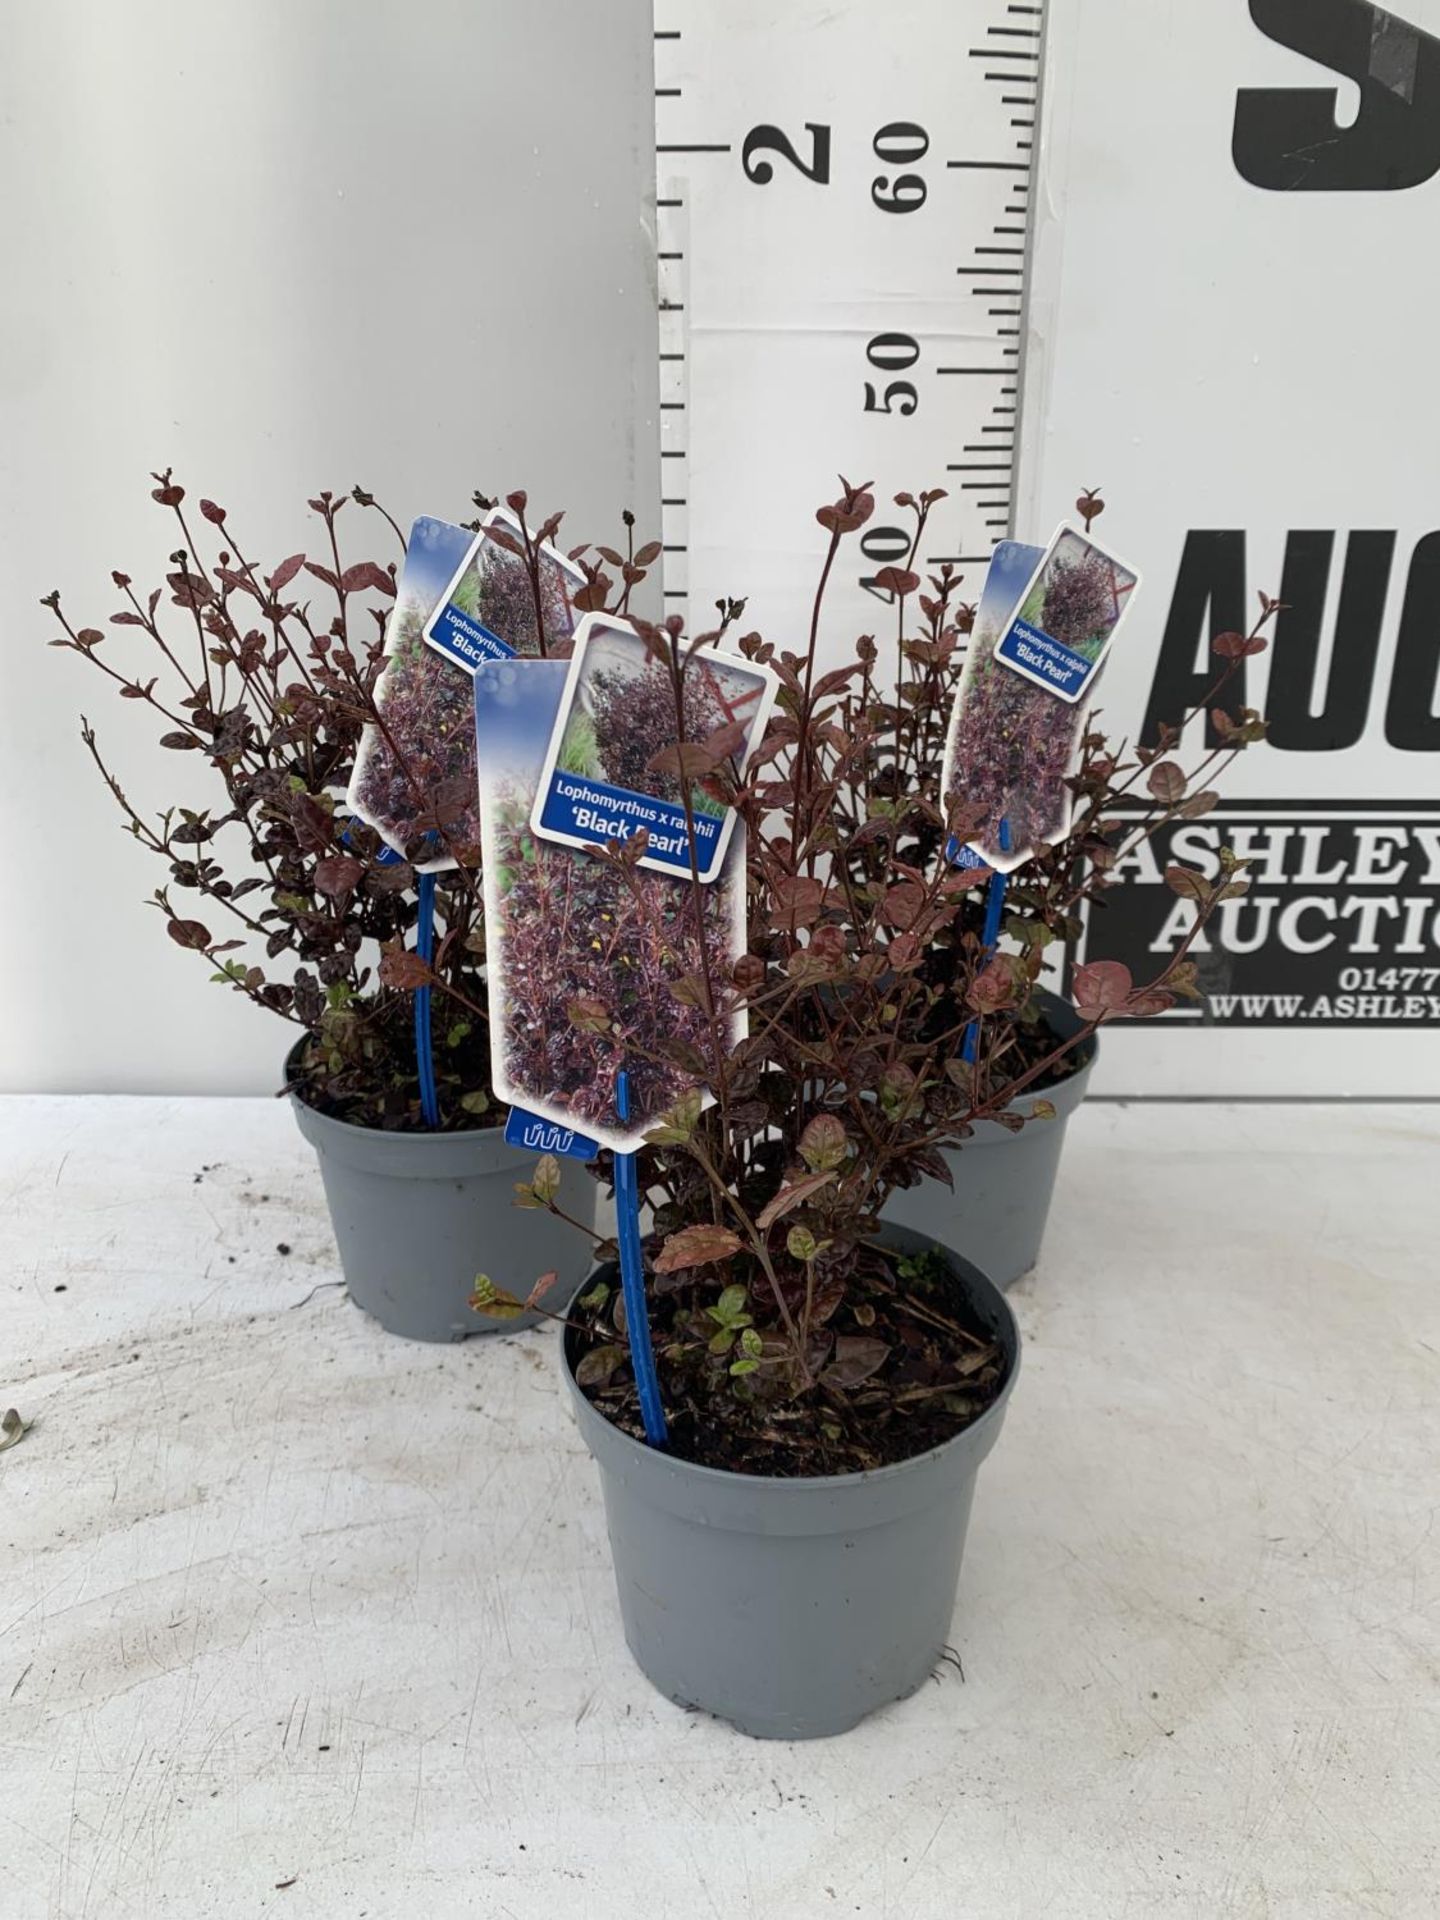 THREE LOPHOMYRTUS RALPHII NEW ZEALAND MYRTLE 'BLACK PEARL' IN 2 LTR POTS HEIGHT 40CM - 50CM TO BE